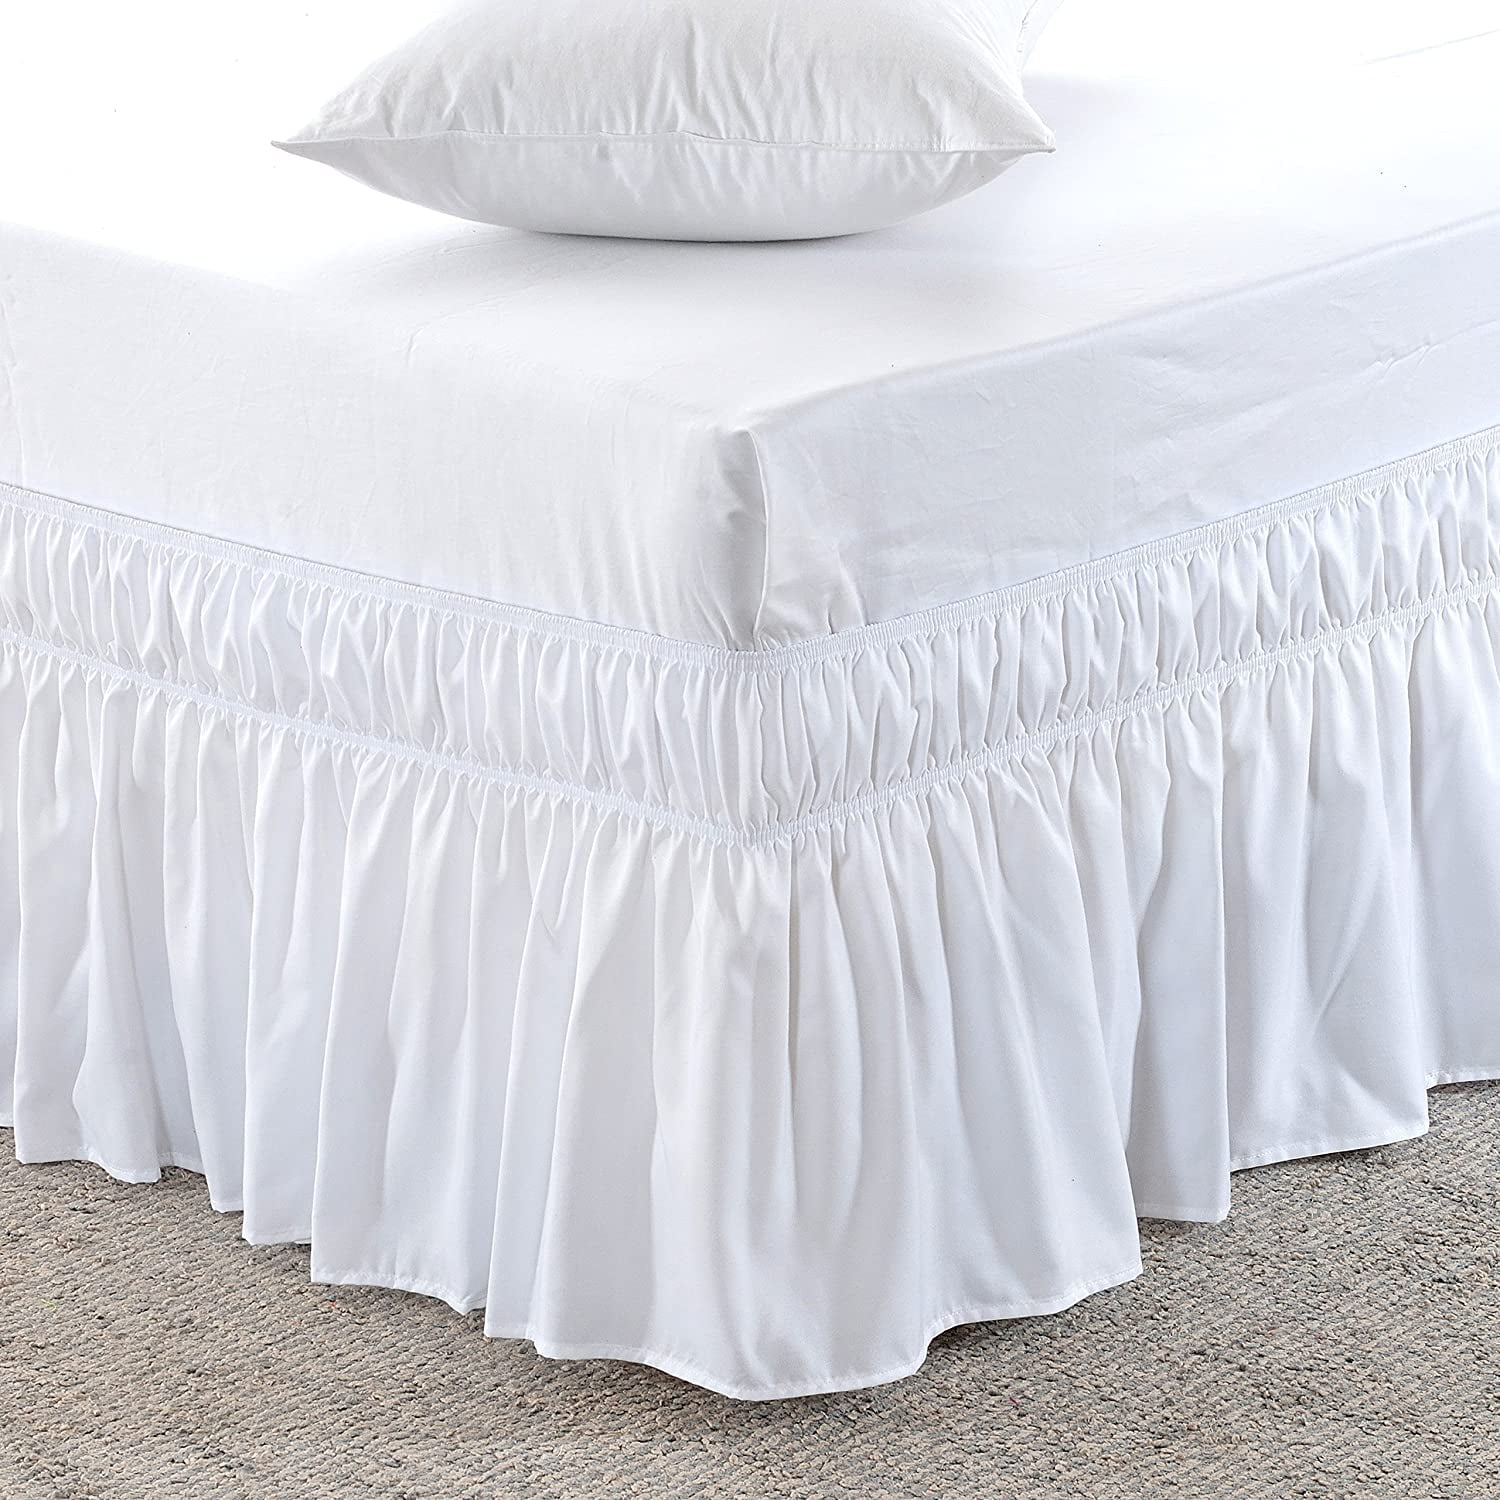 Bedroom Twin/Full Size Elastic Bed Wrap Ruffle Bed Skirt Around Bed 14" Drop US 